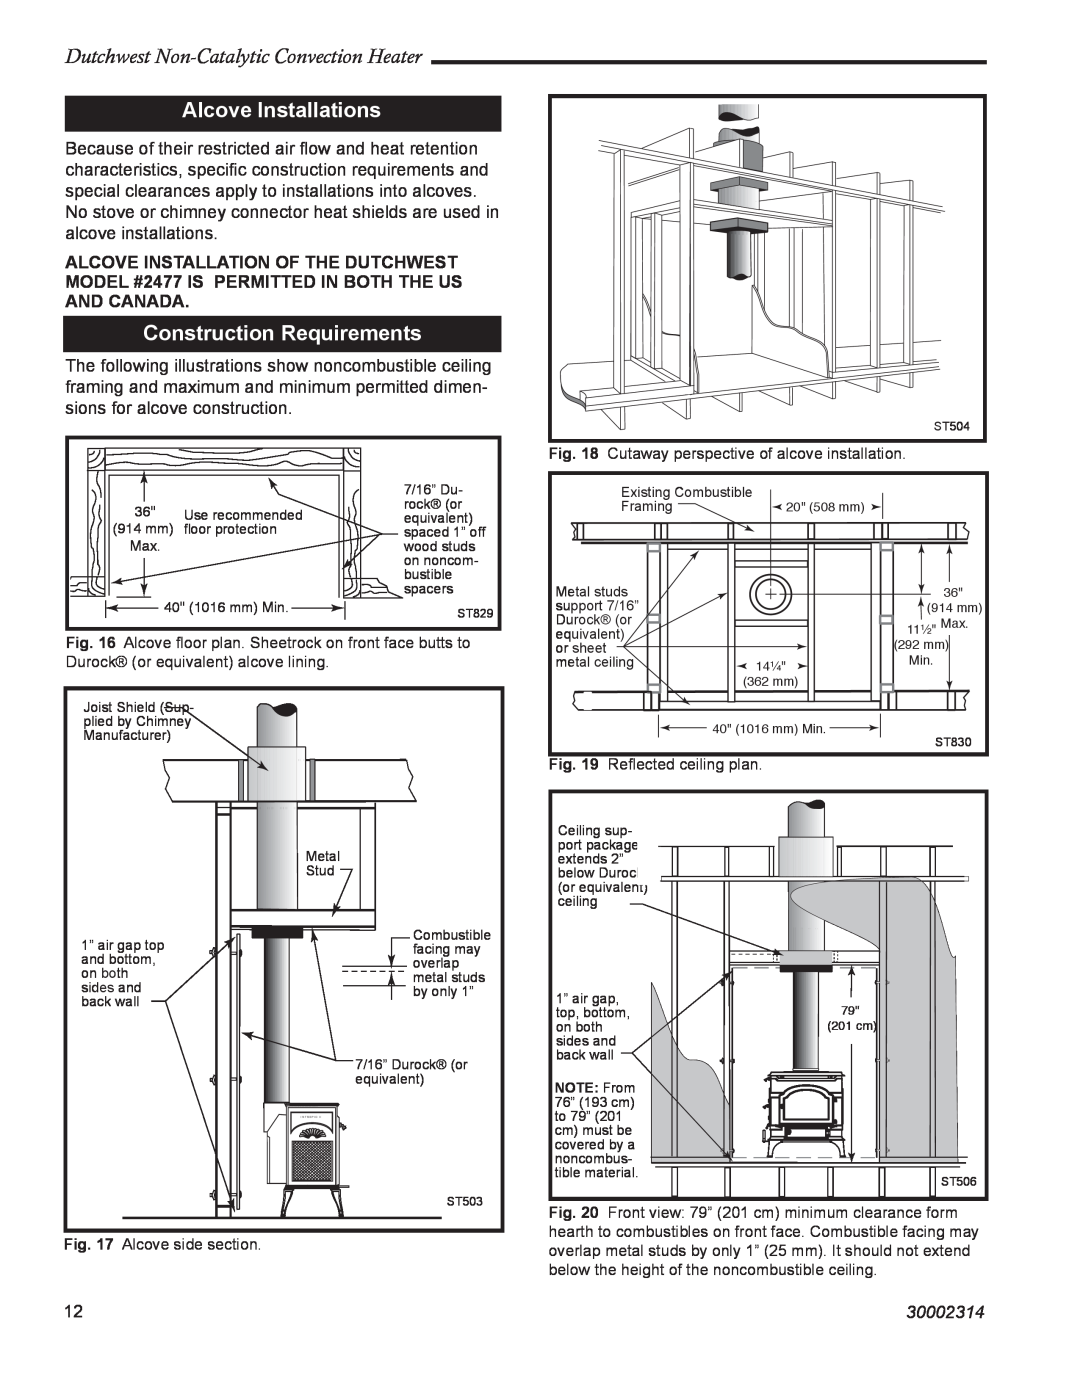 Vermont Casting 2477 Alcove Installations, Construction Requirements, Dutchwest Non-CatalyticConvection Heater, 30002314 